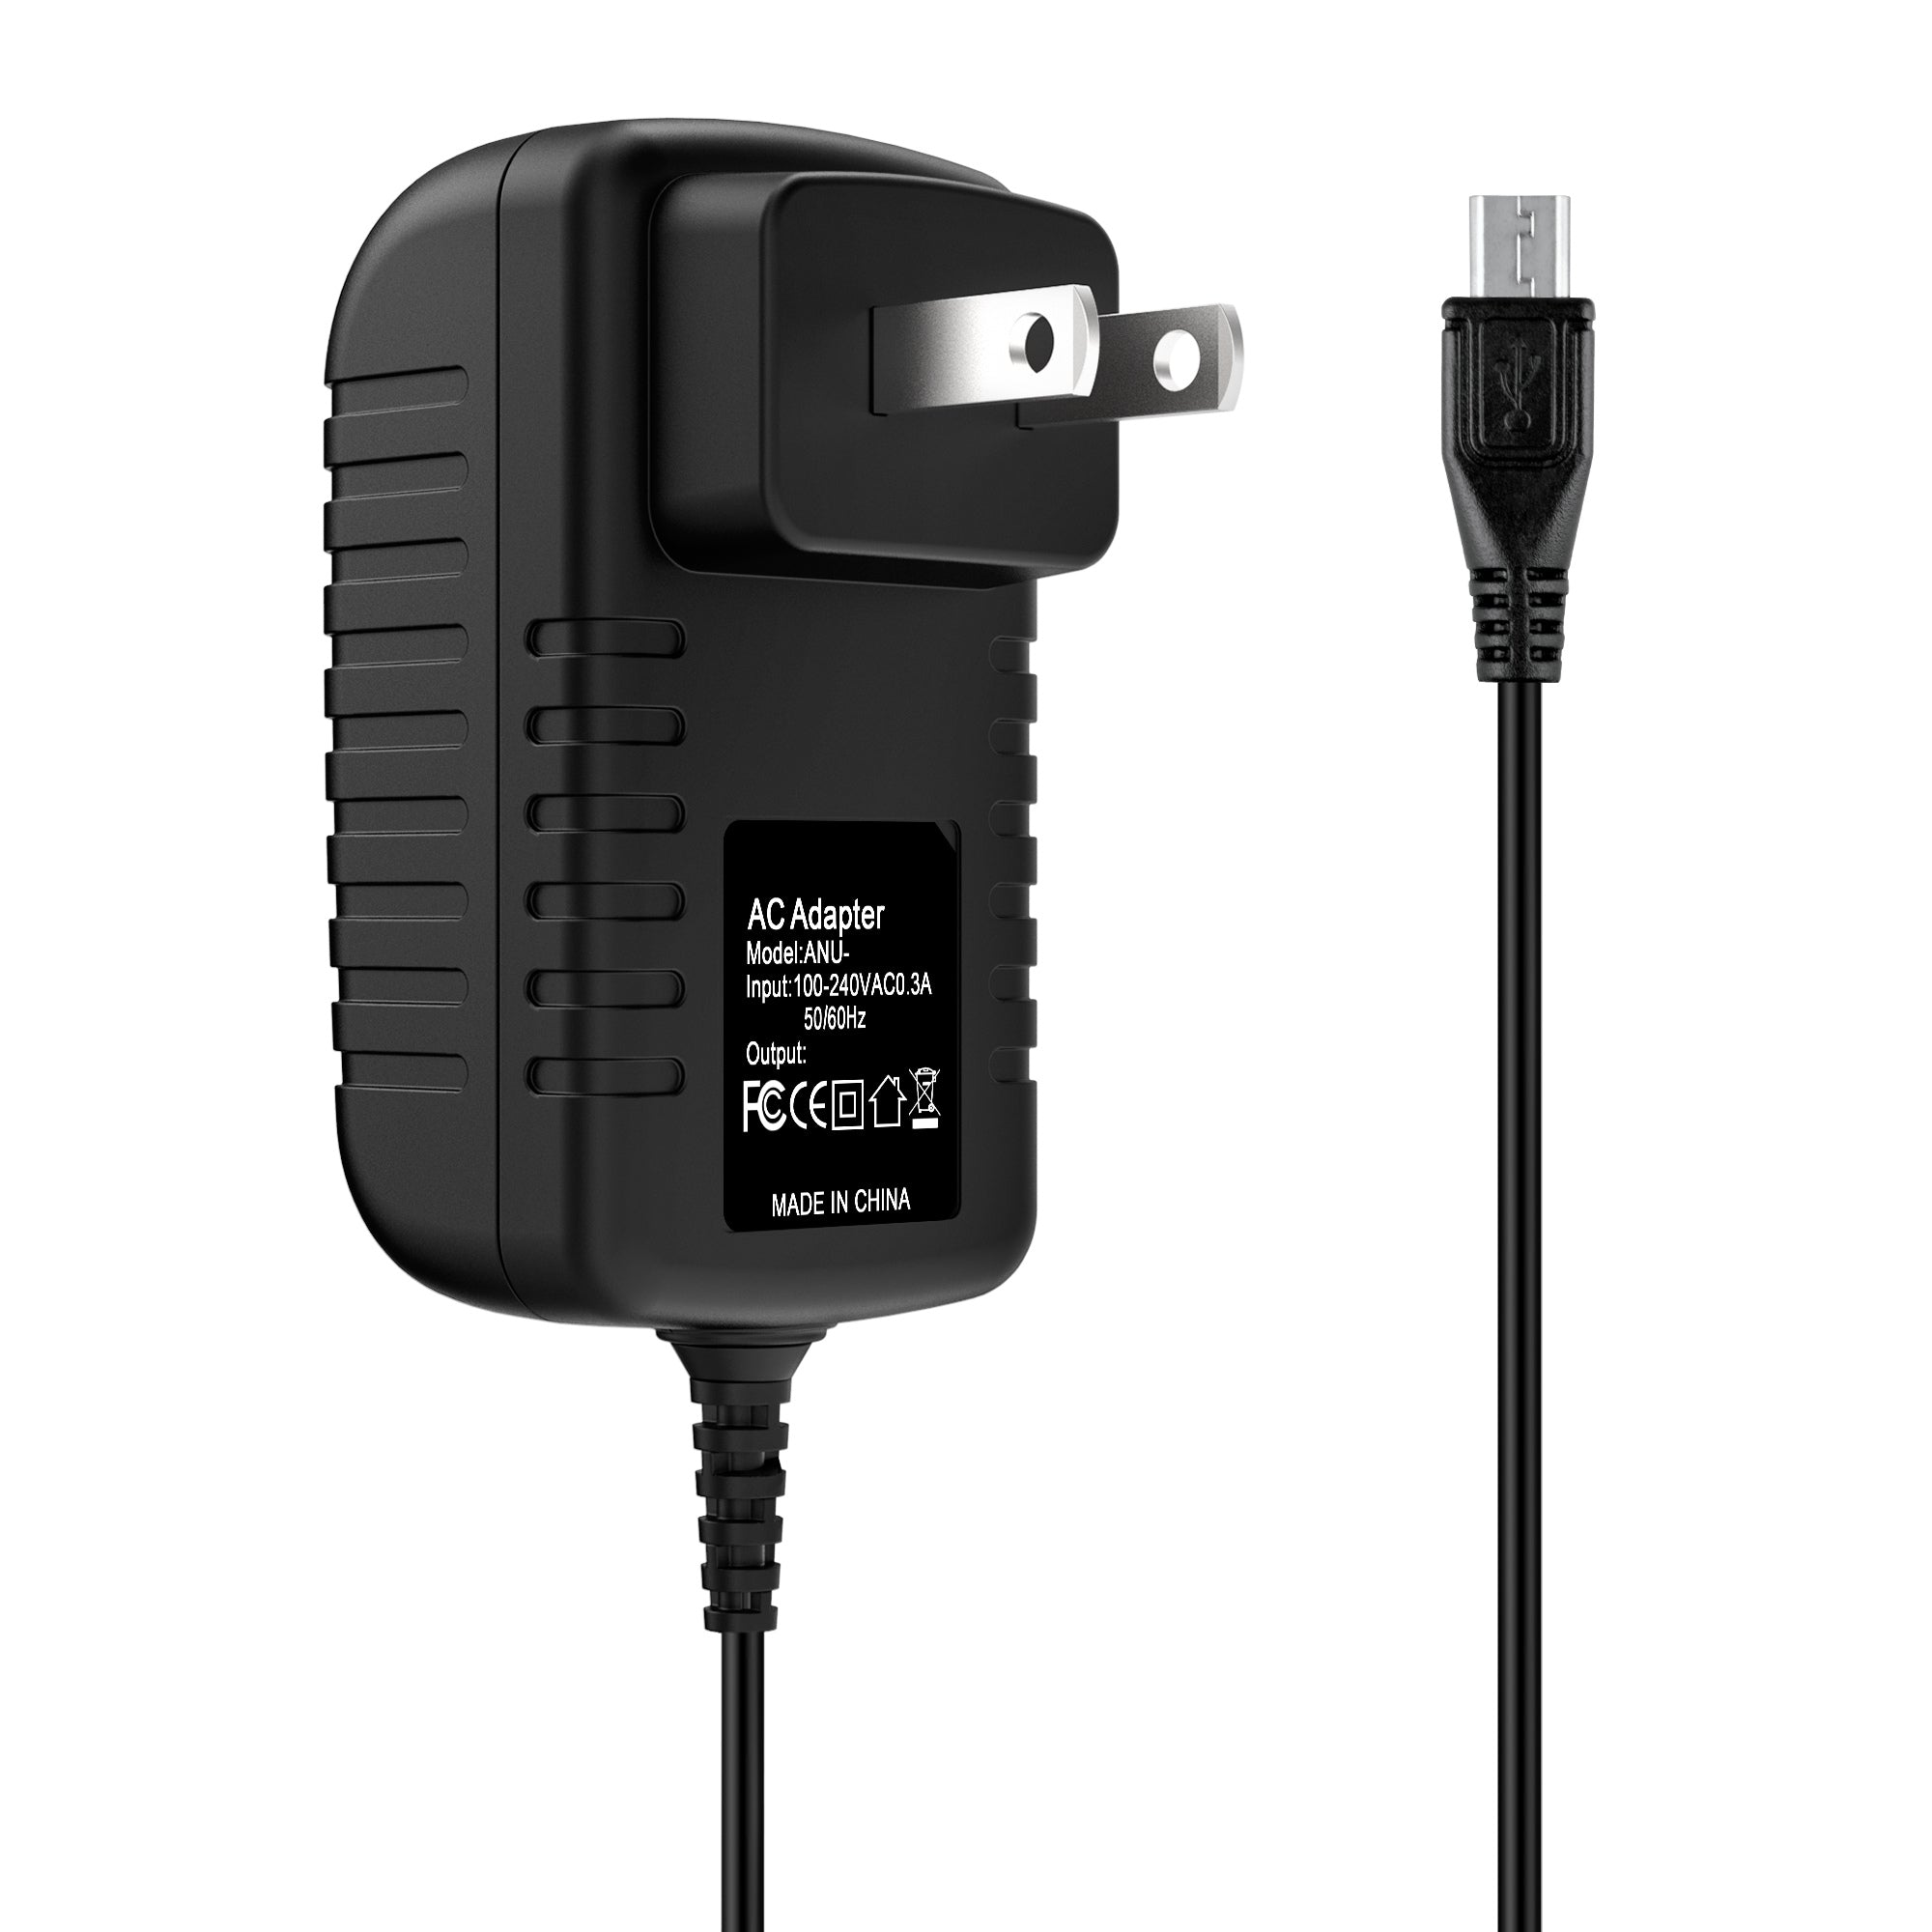 AbleGrid 5V 2A Travel Adapter Charger/Power Compatible with Nokia Lumia 920 900 820 800 710